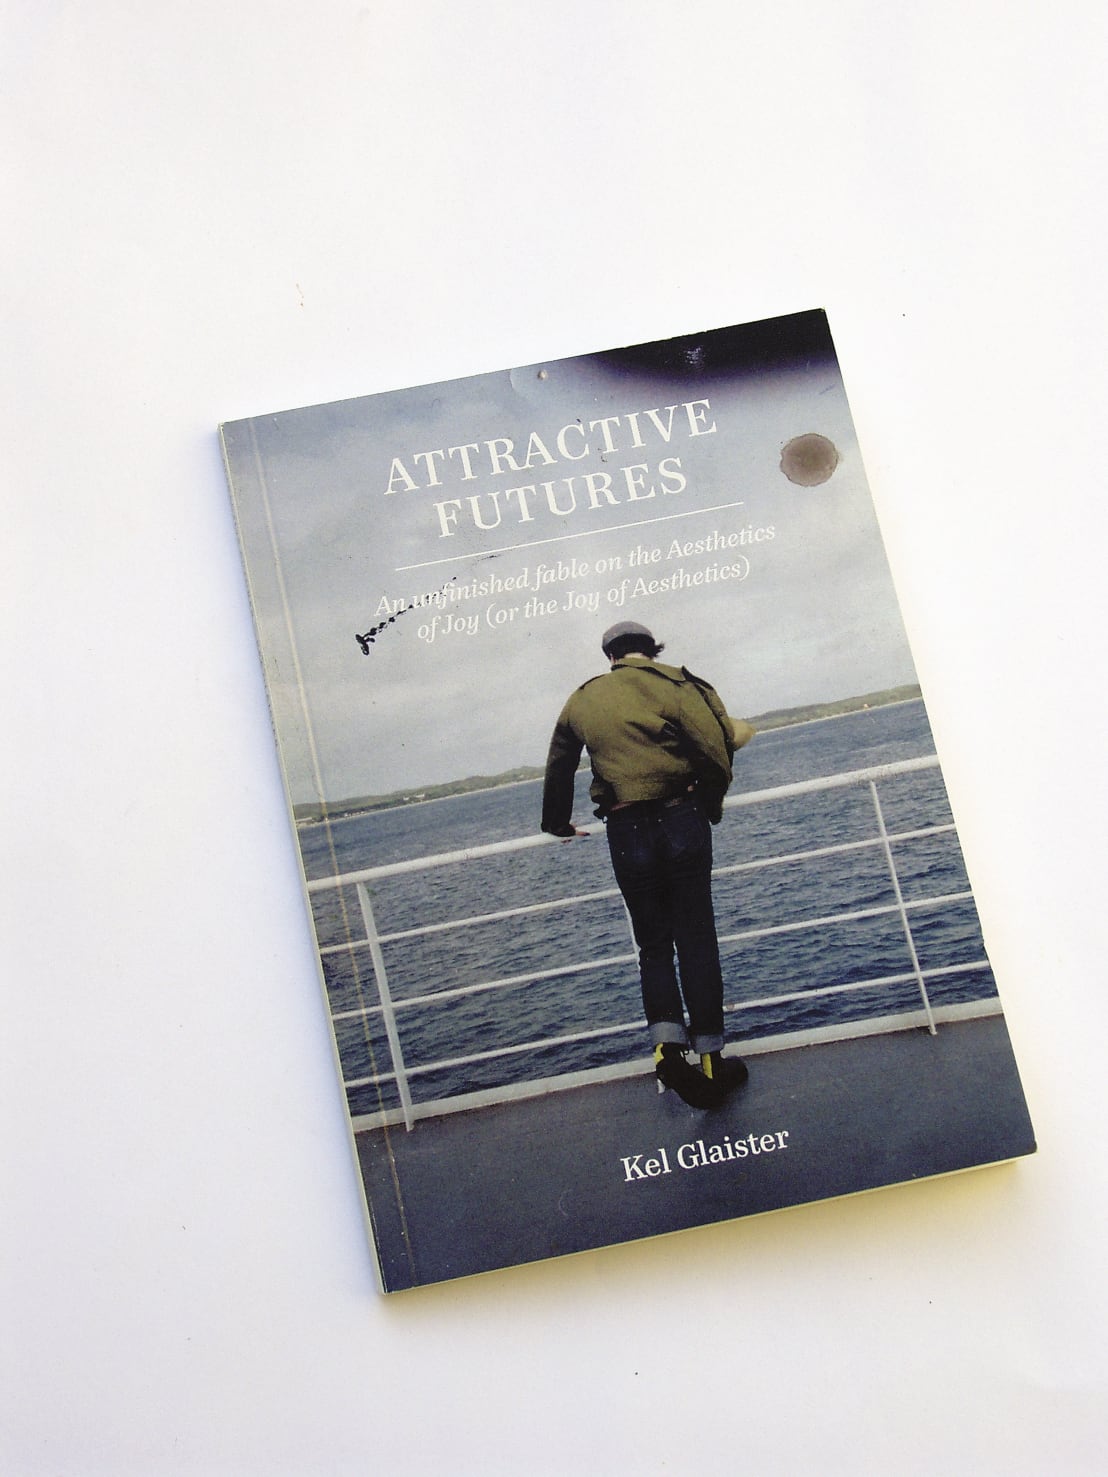 Kel Glaister, <em>Attractive Futures, an unfinished fable on the Aesthetics of Joy (or the Joy of Aesthetics)</em> 2010, book Image courtesy the artist, Photo credit: Kel Glaister